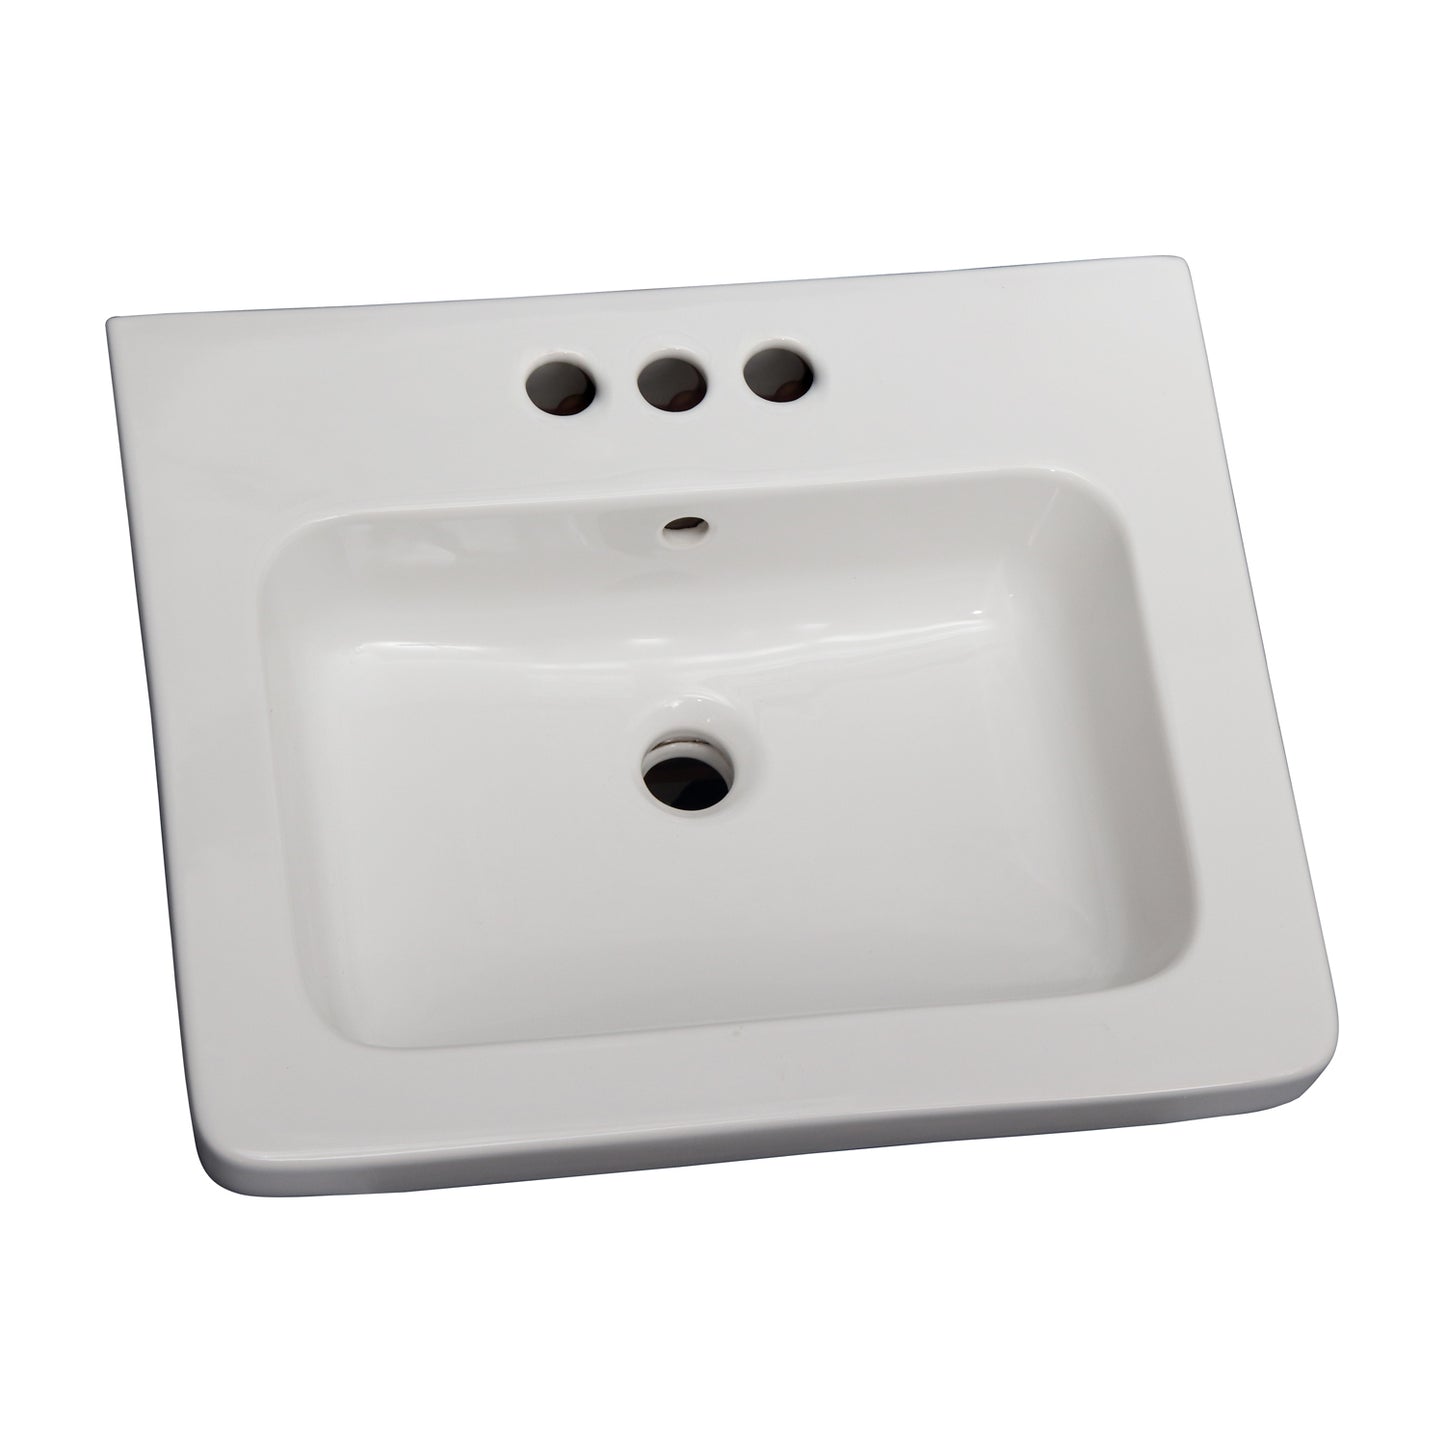 Resort 550 Wall Hung Bathroom Sink White For 4" Centerset Faucet